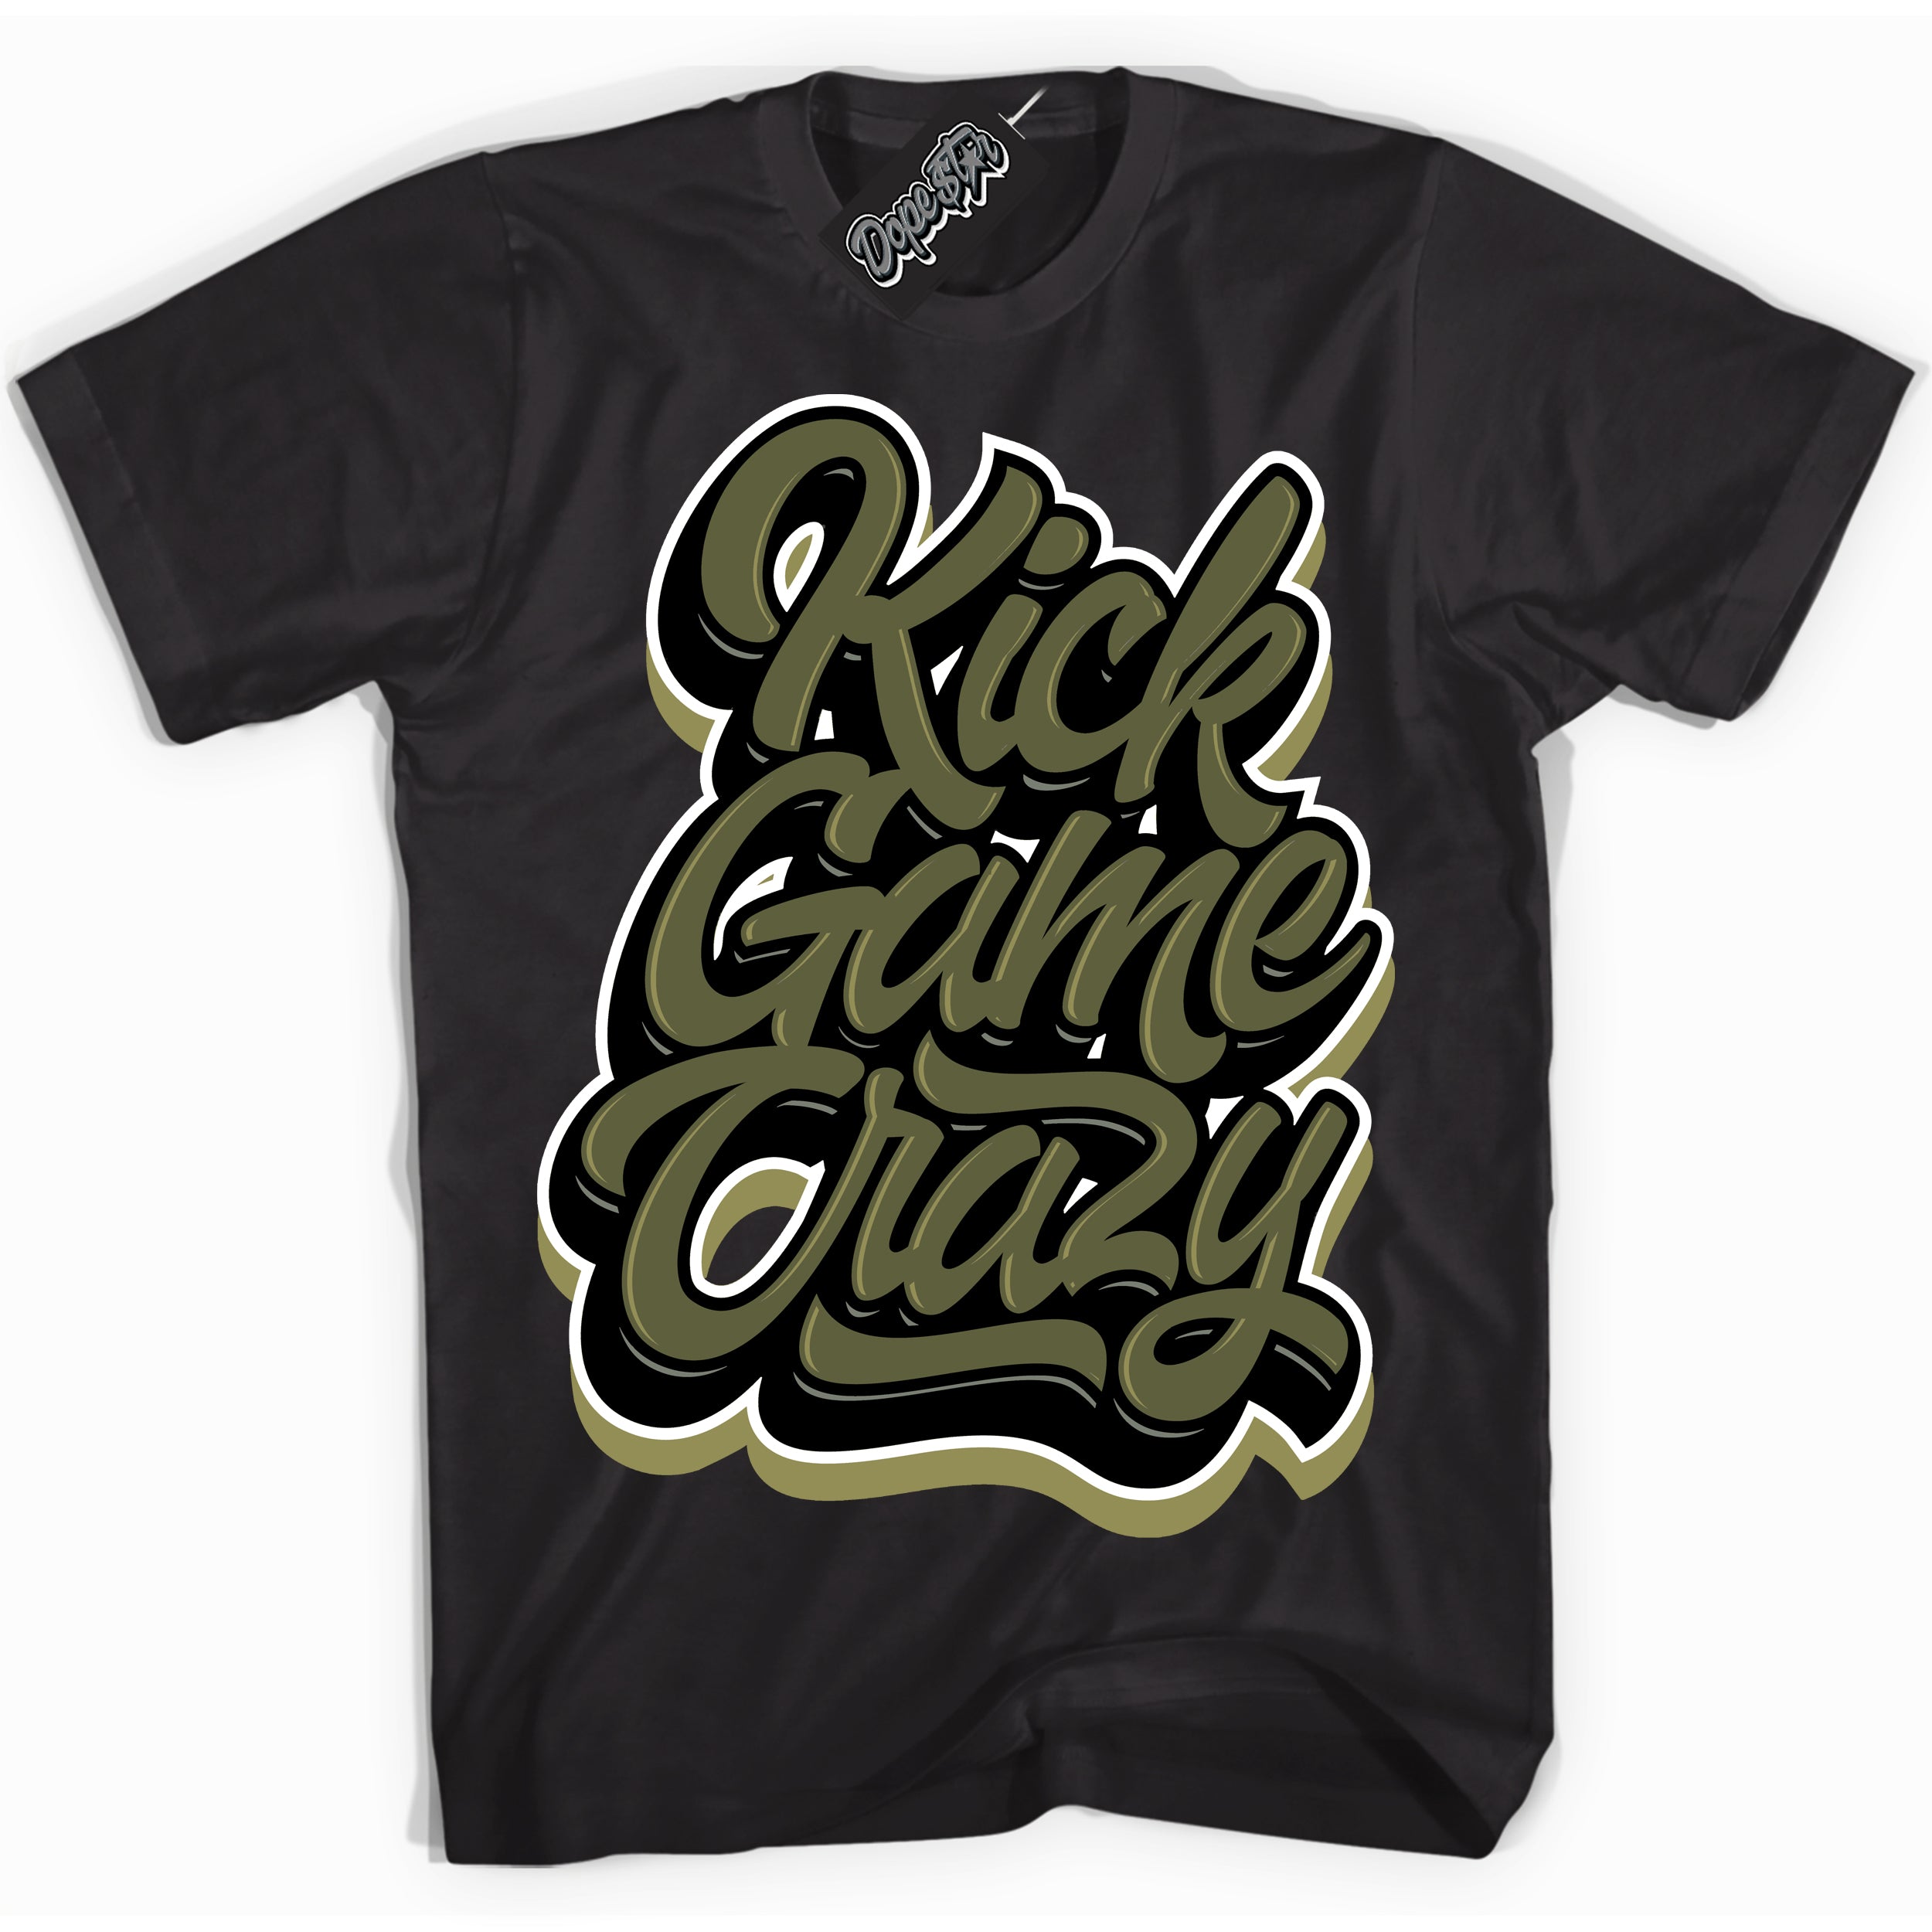 Cool Black graphic tee with “ Kick Game Crazy ” print, that perfectly matches Craft Olive 4s sneakers